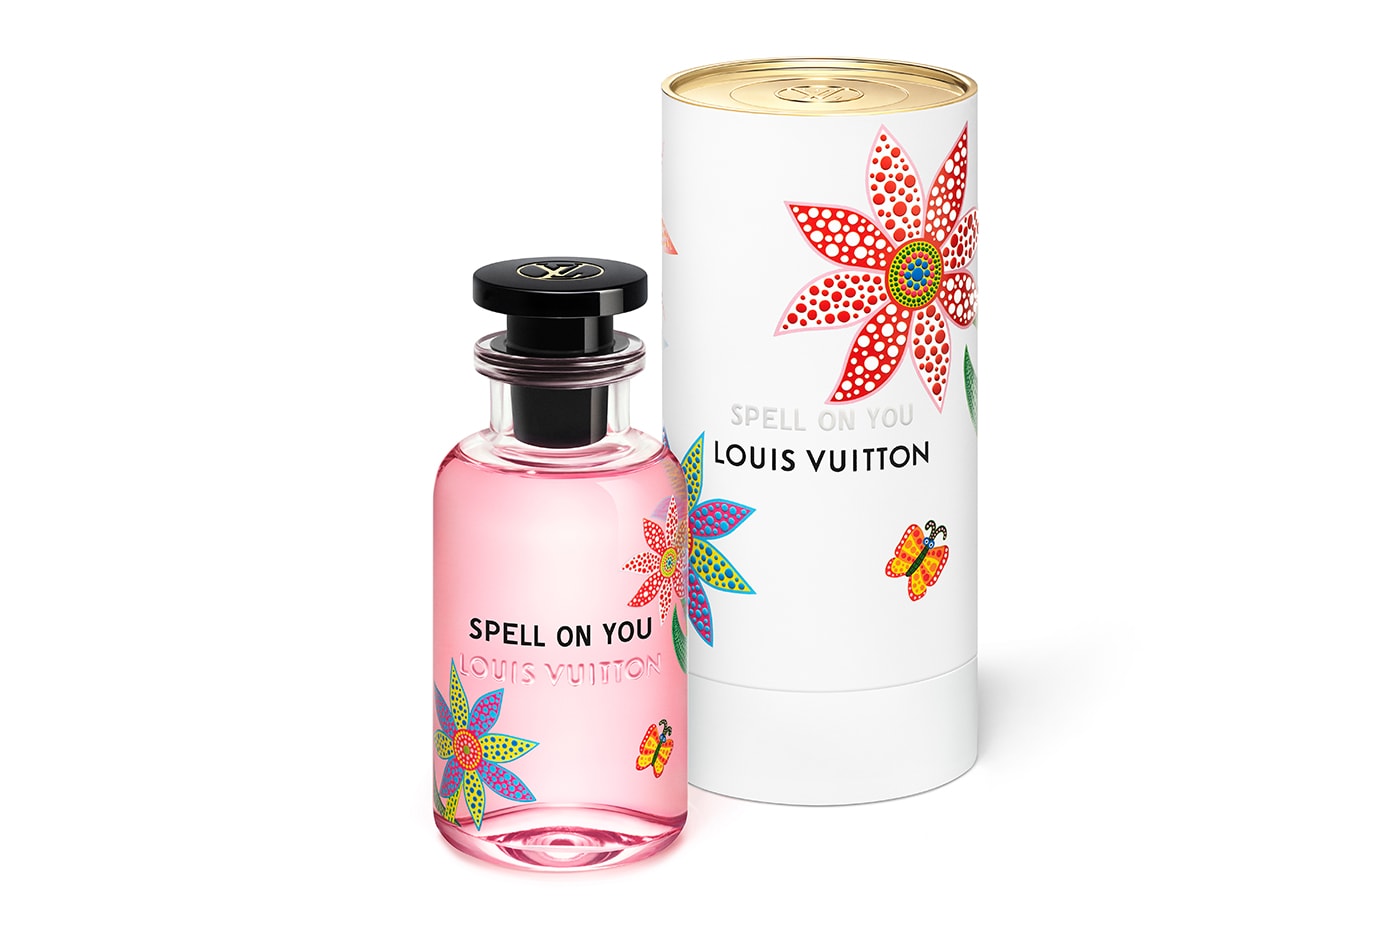 A Guide To The Louis Vuitton Fragrance Collection in 2023